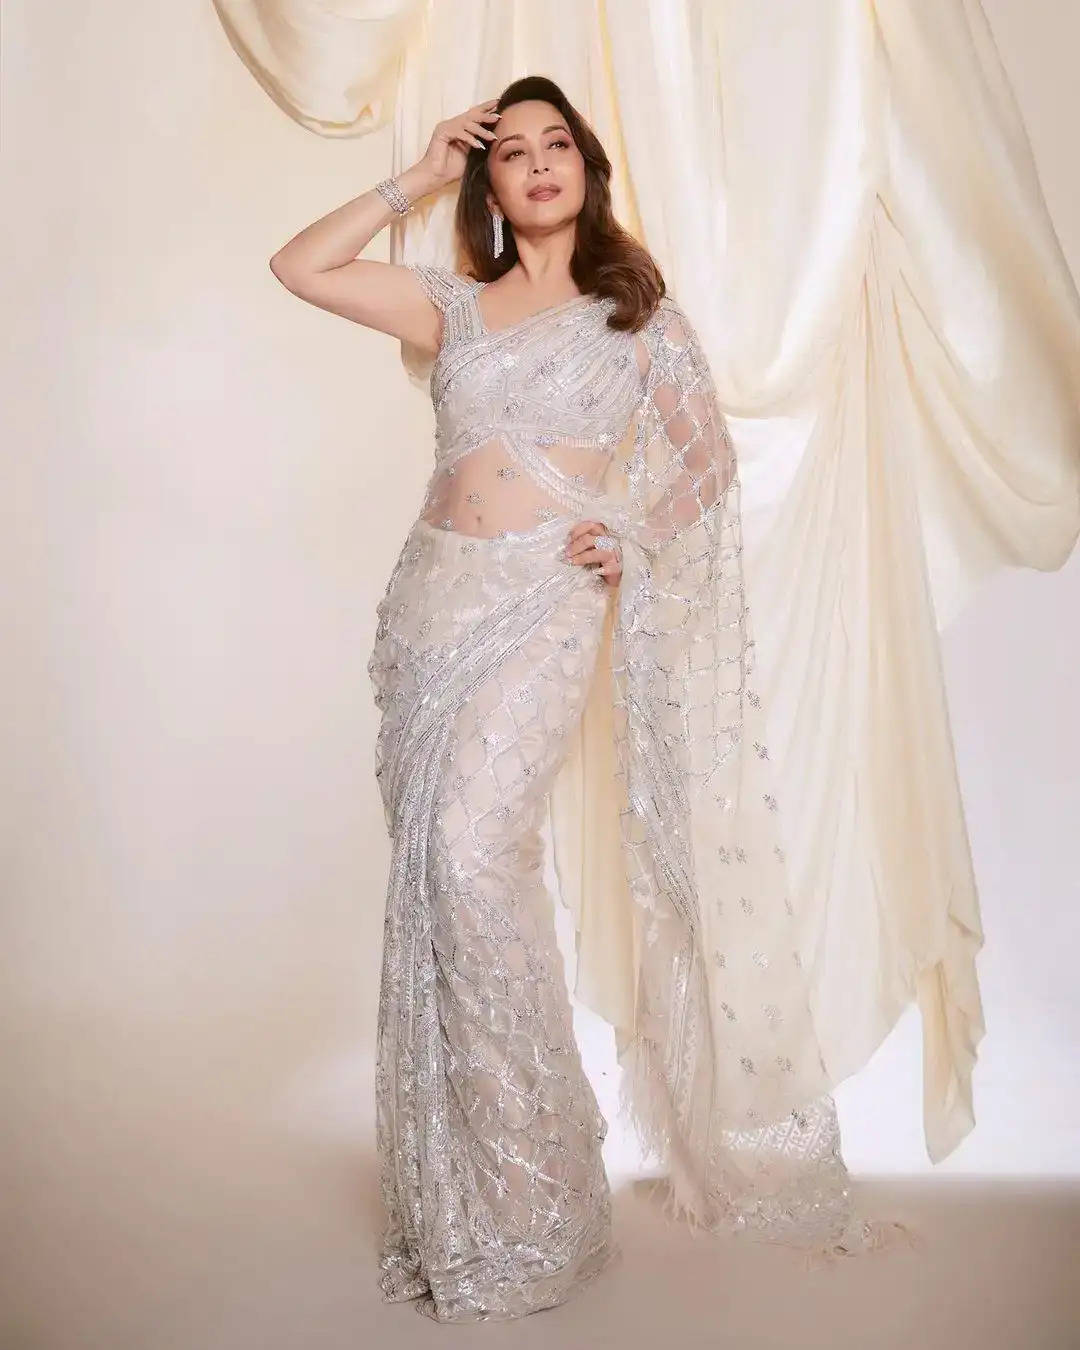 Photos: These Saree Looks Of Madhuri Dixit Are Sight To Behold, Check PICS